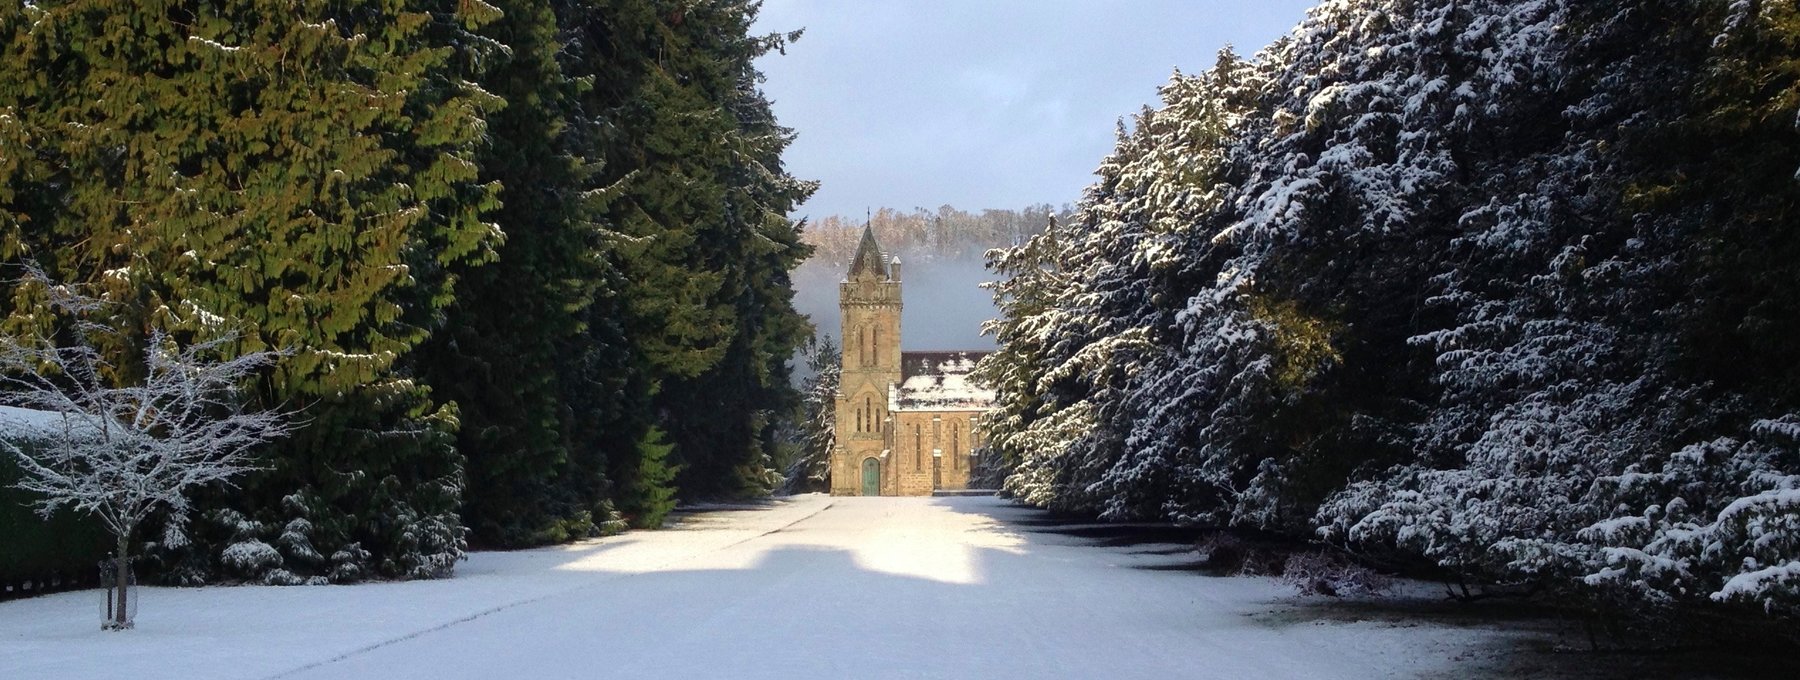 fullsizeoutput_2b8e - The chapel at Murthly Castle makes the perfect setting for a winter wedding. (© Murthly Estate)